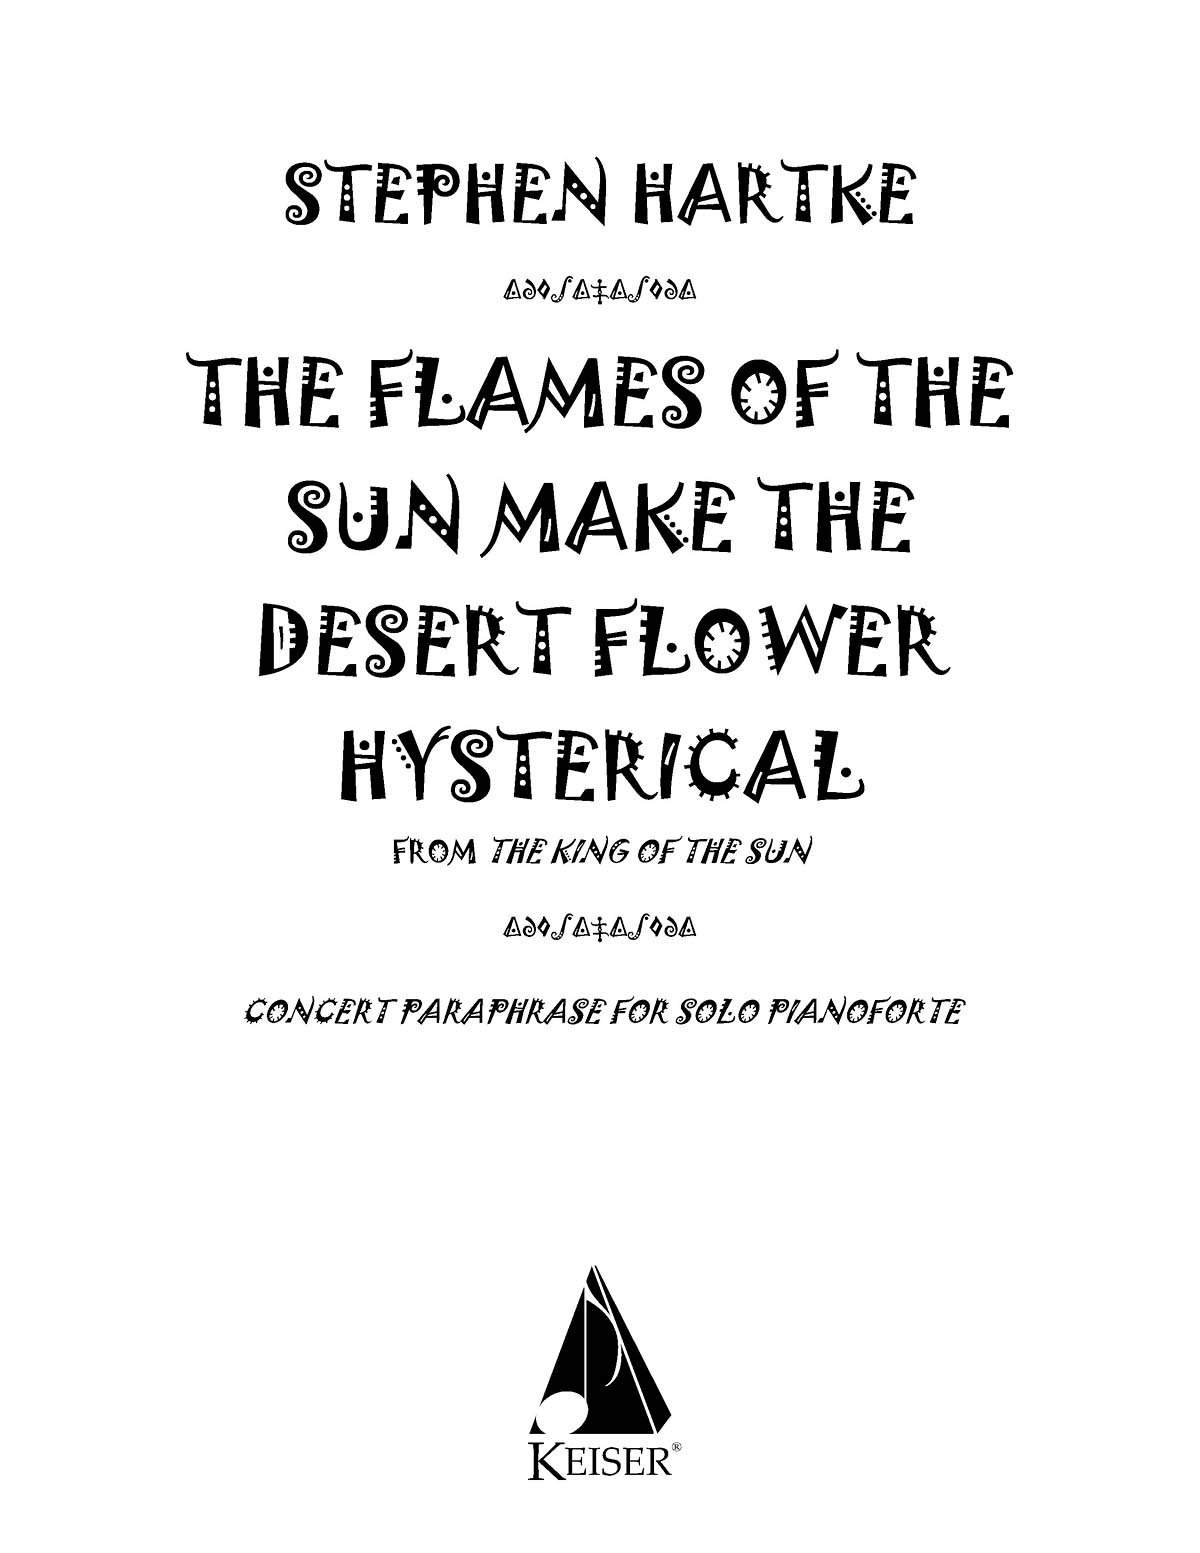 The Flames of the Sun Make the Desert Flower Hyst: Piano: Instrumental Album